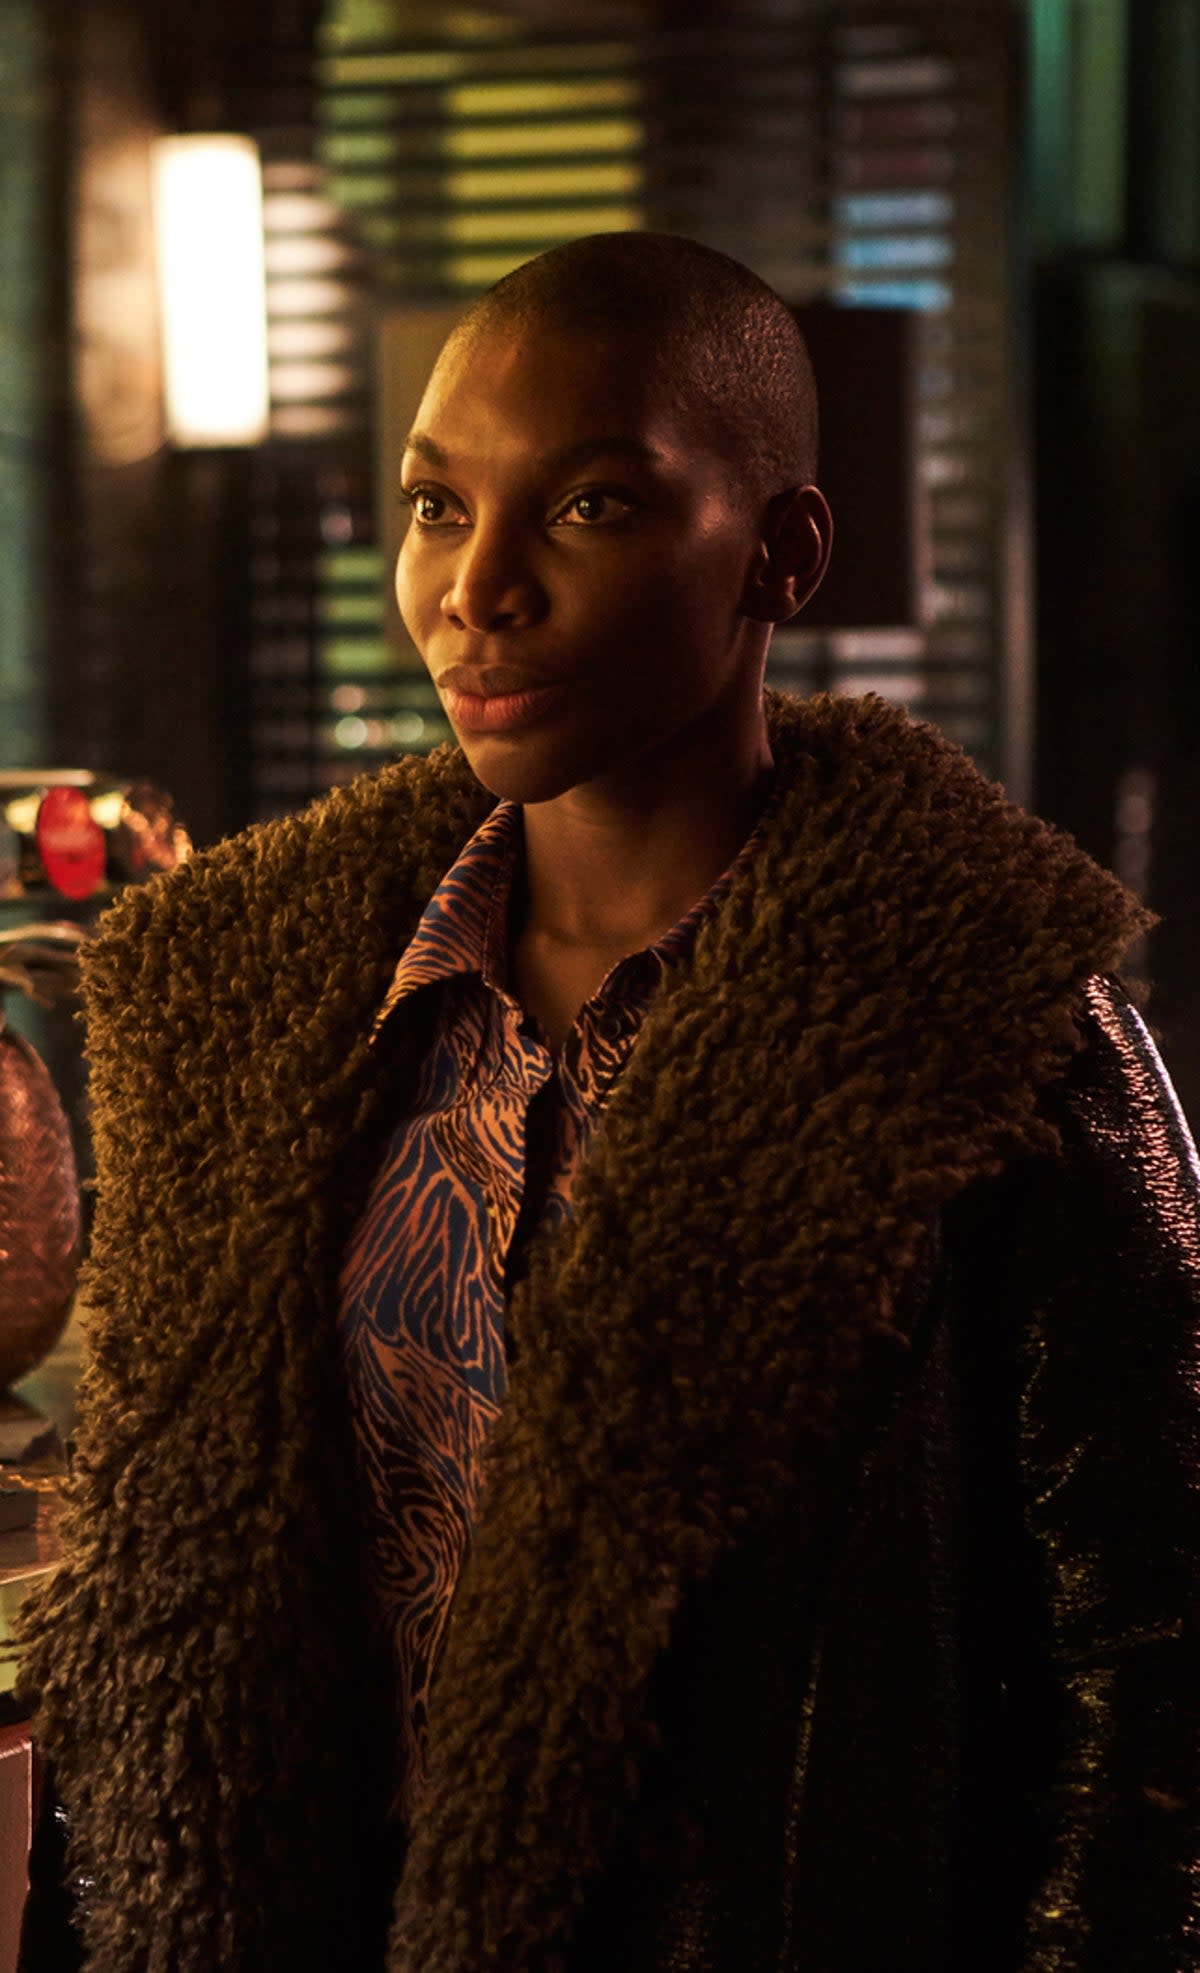 Non-consensual condom removal played an important role in Michaela Coel’s award-winning BBC/HBO series ‘I May Destroy You’ (BBC/HBO)